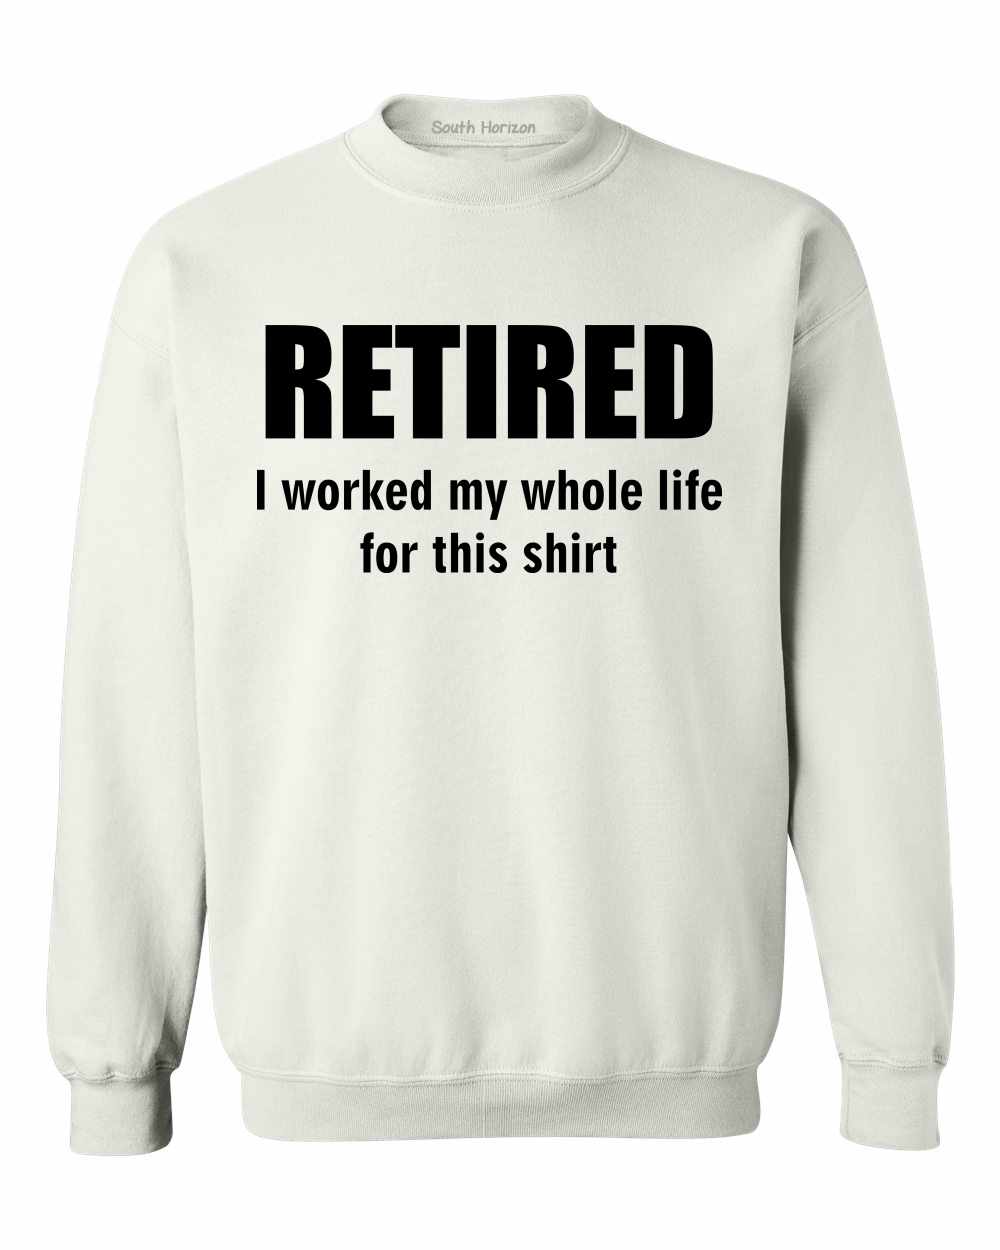 RETIRED, I worked my whole life for this shirt SweatShirt (#920-11)